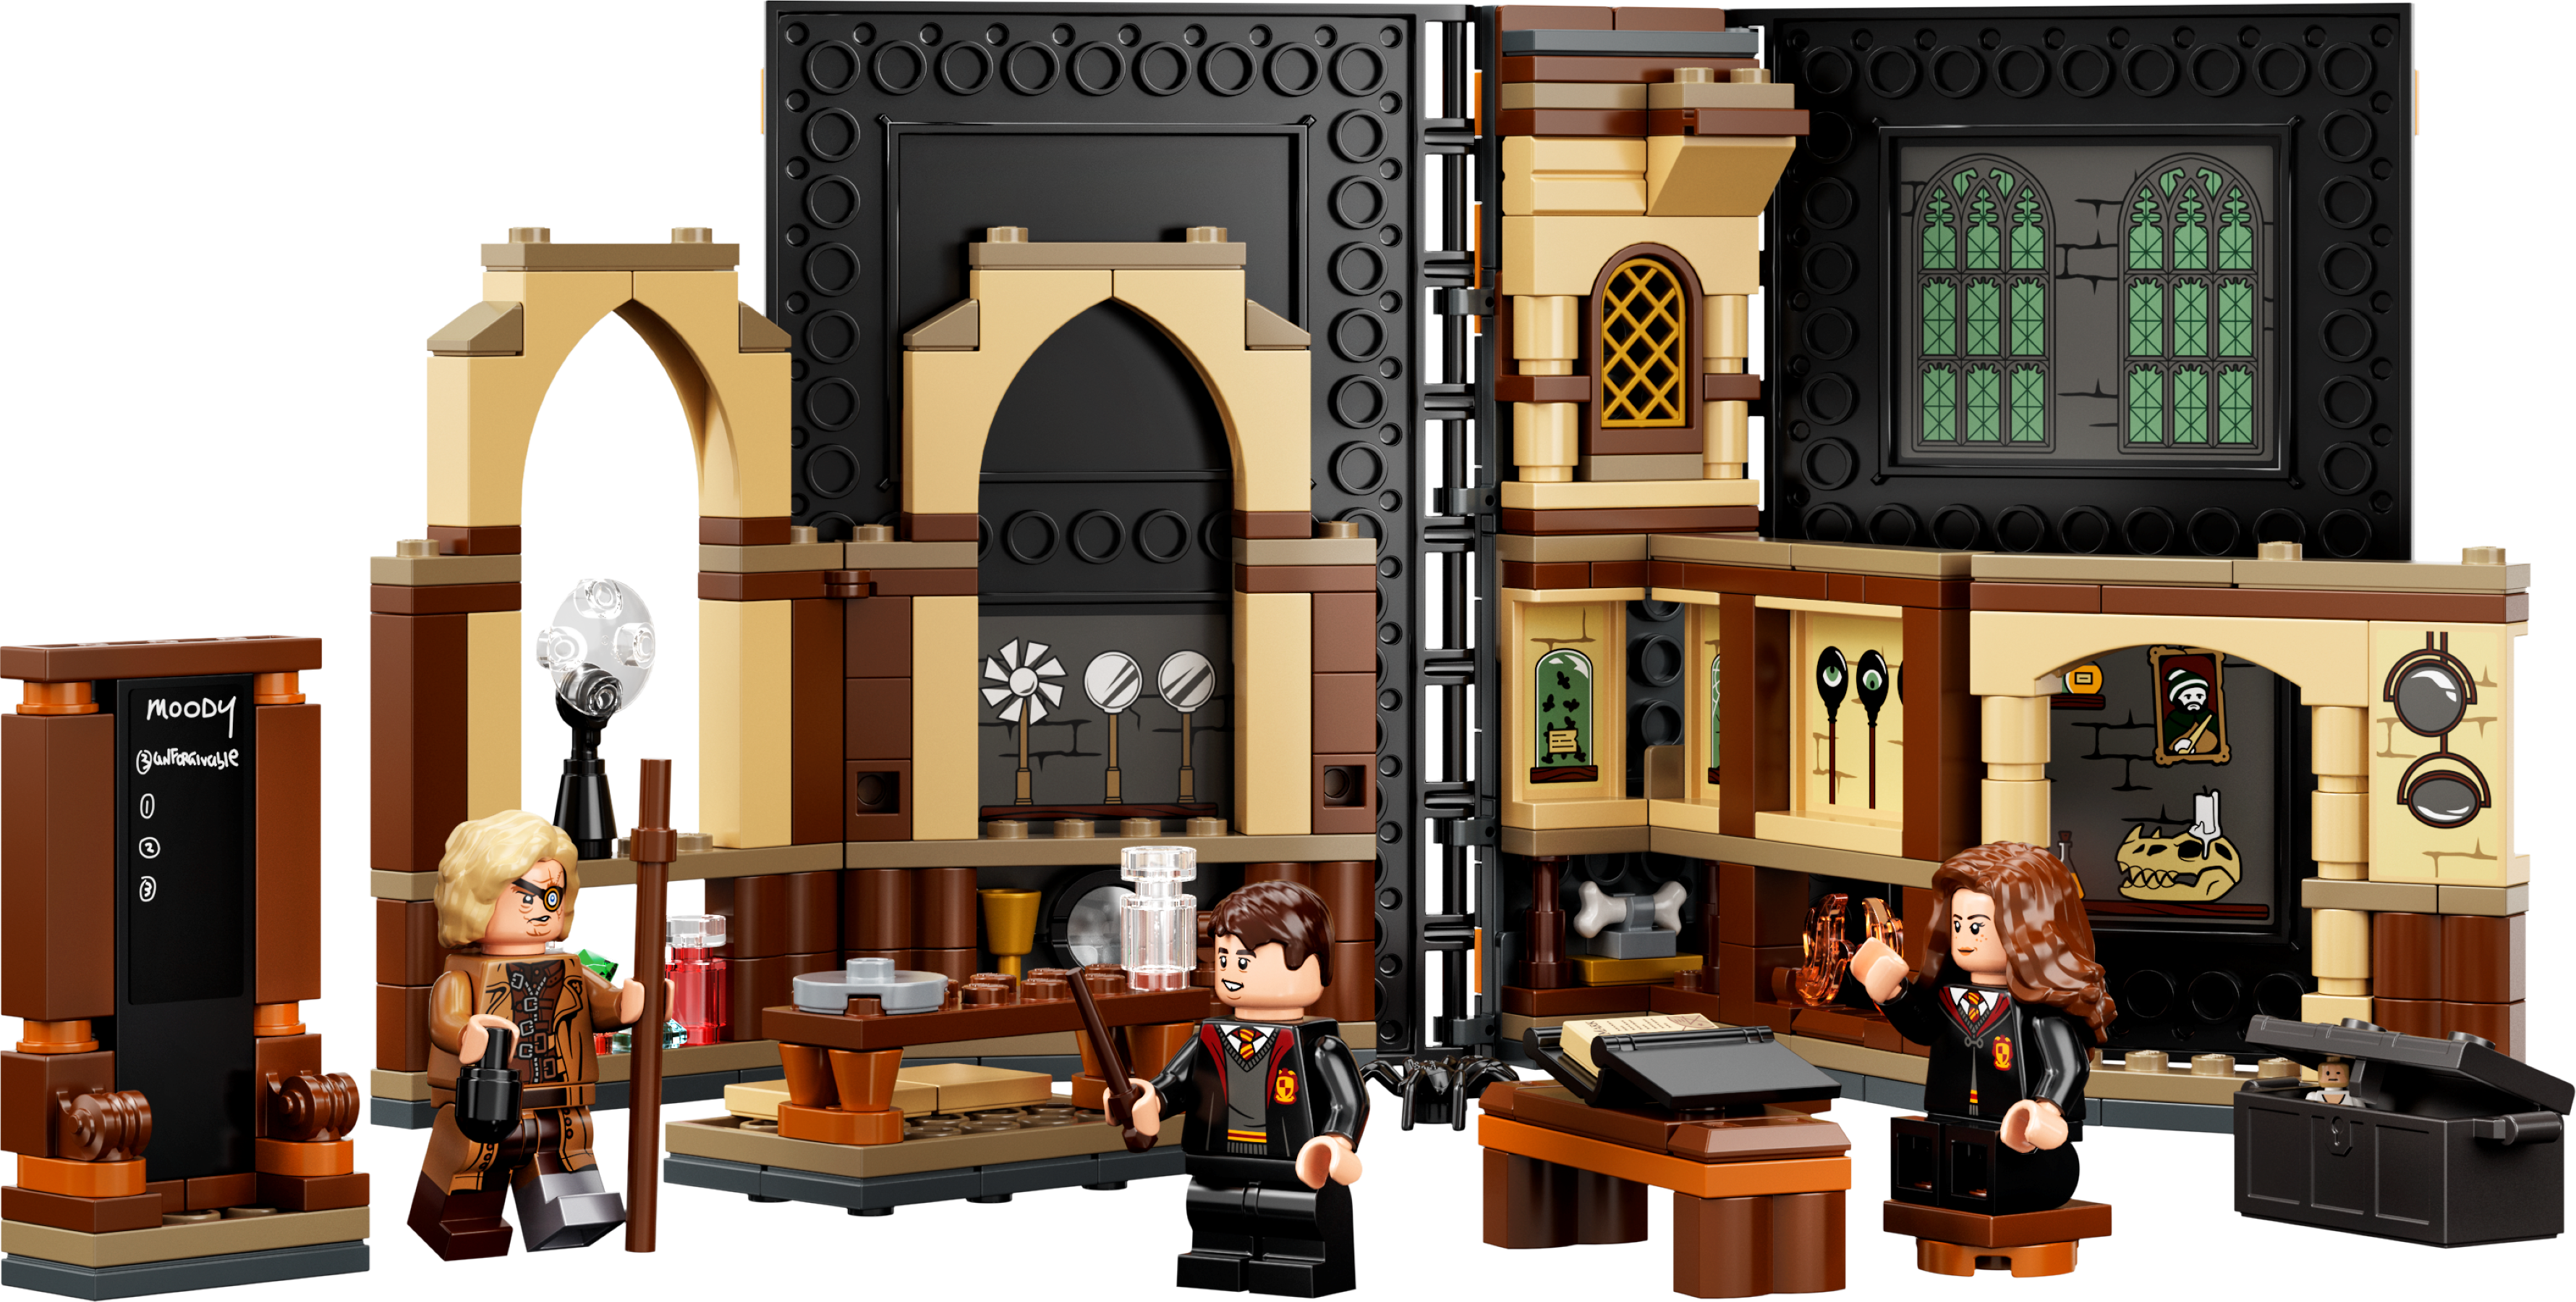 Attend Lessons At Hogwarts With New LEGO Harry Potter Hogwarts Moment Class  Sets